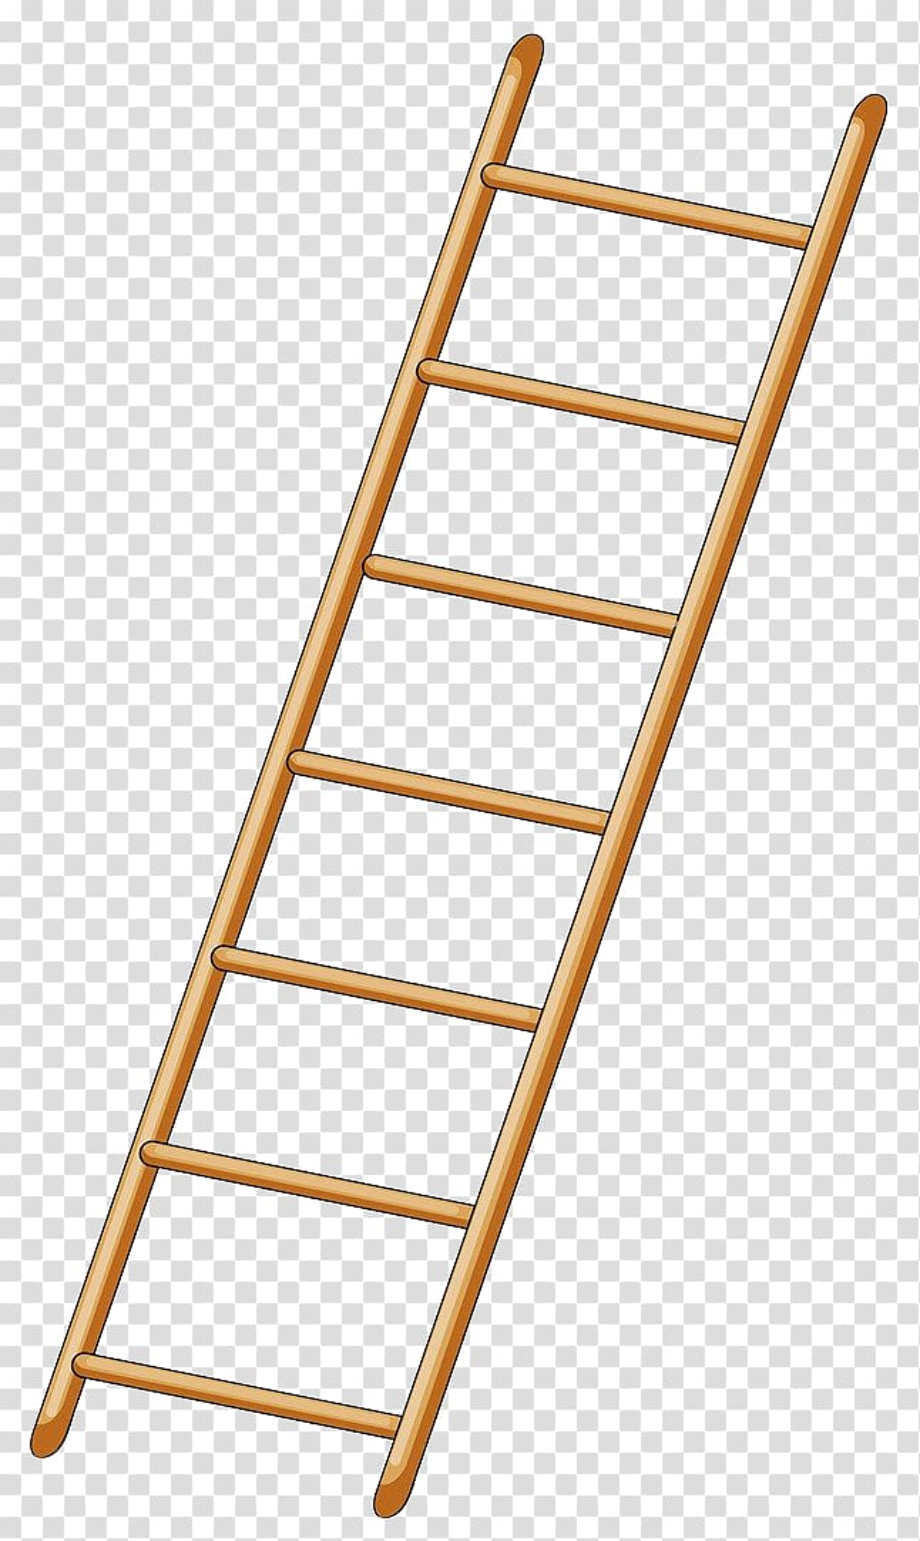 Ladder clipart colorful.